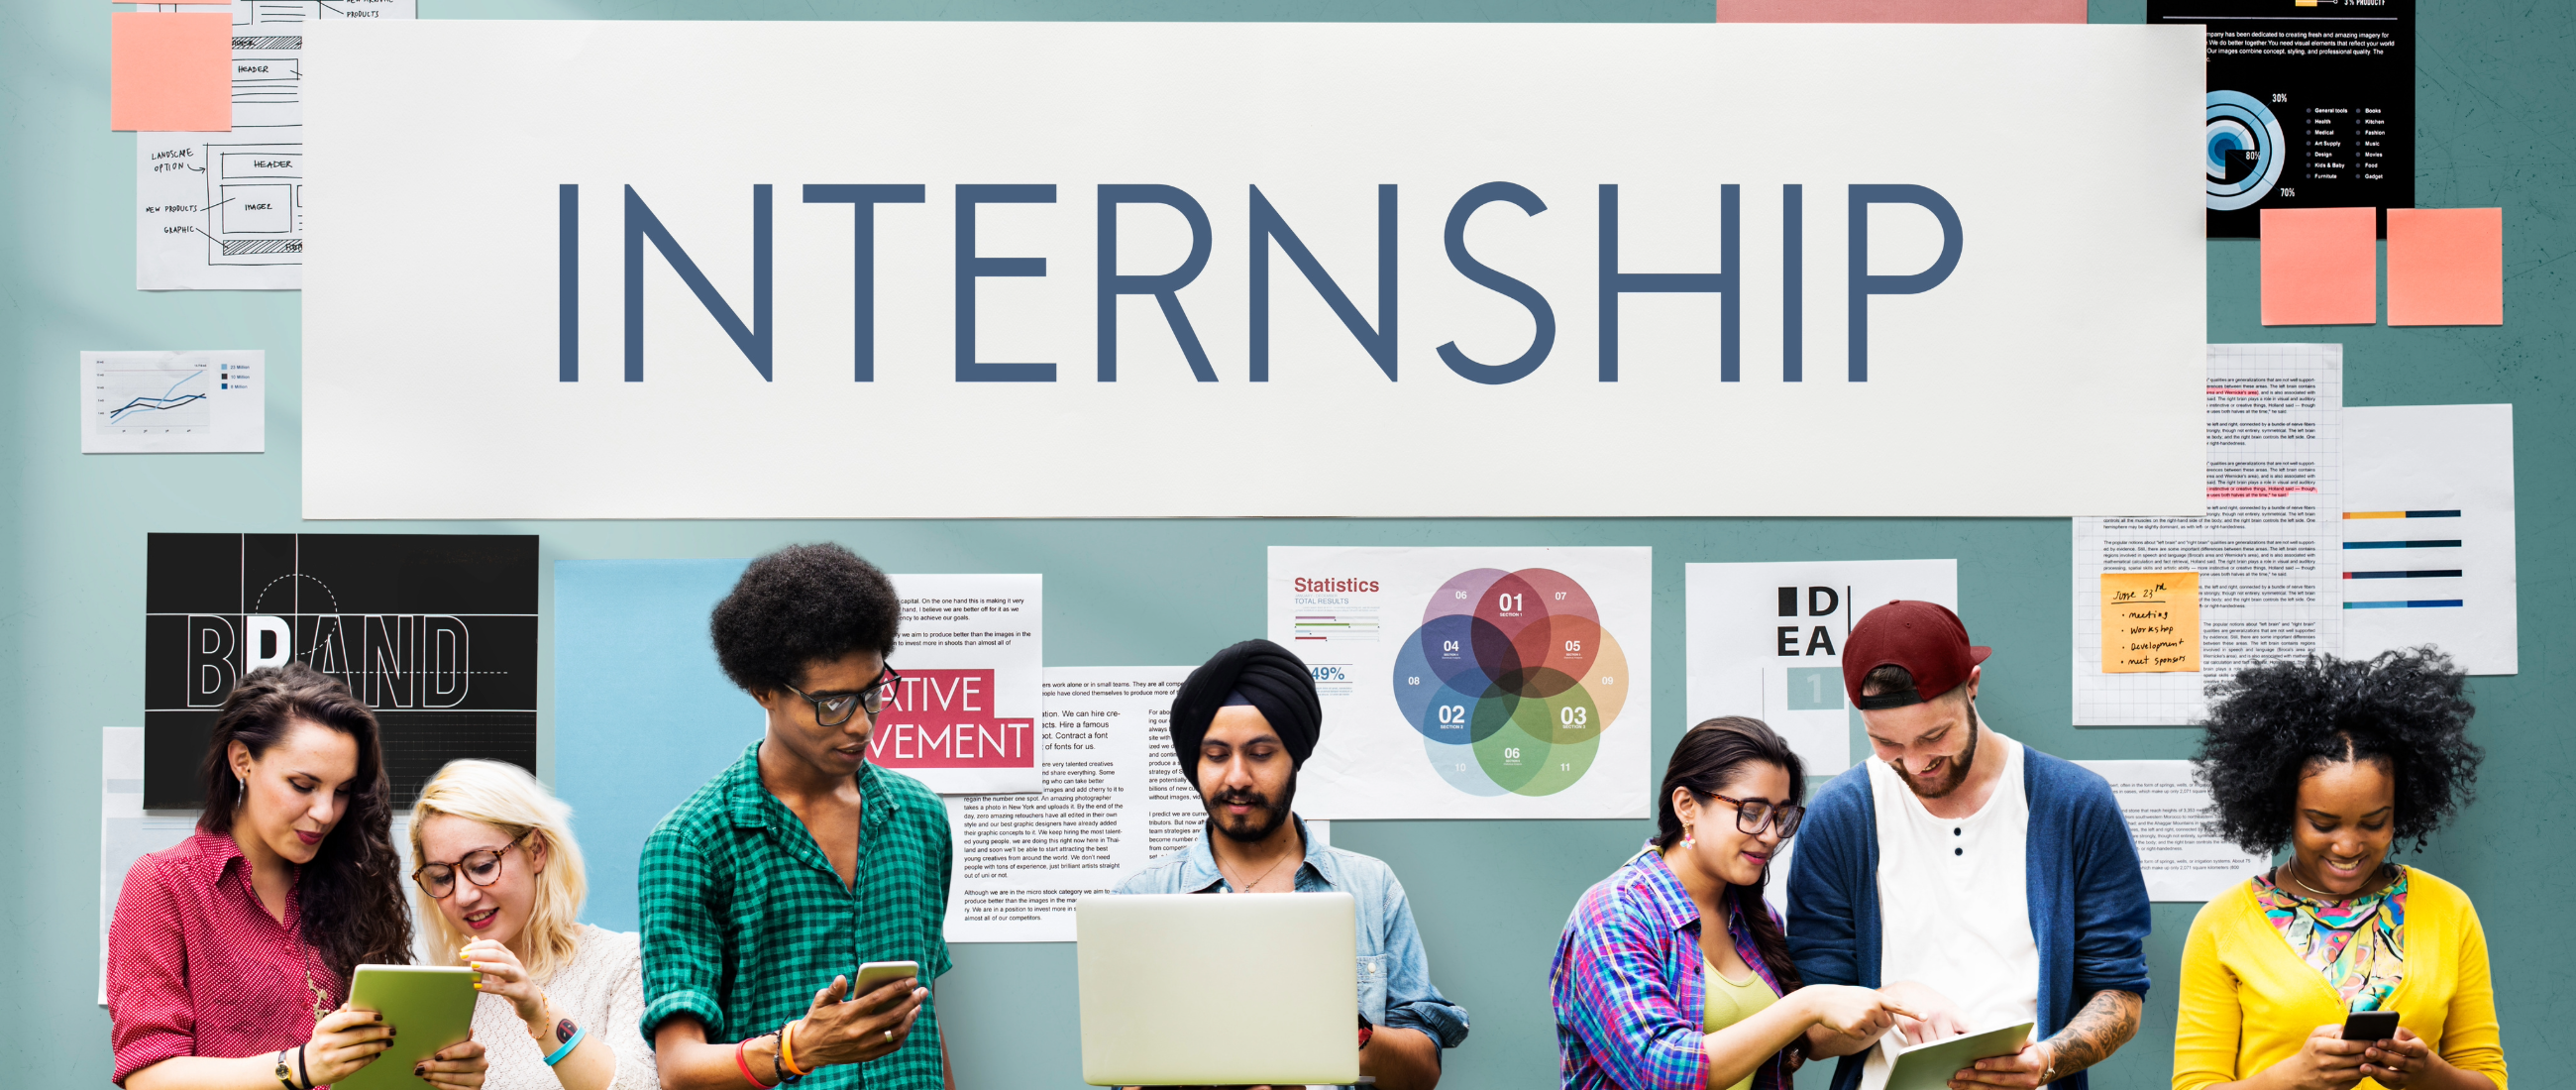 Internship Opportunity: Part Time / Temporary Anthropology/Cultural Resources Intern